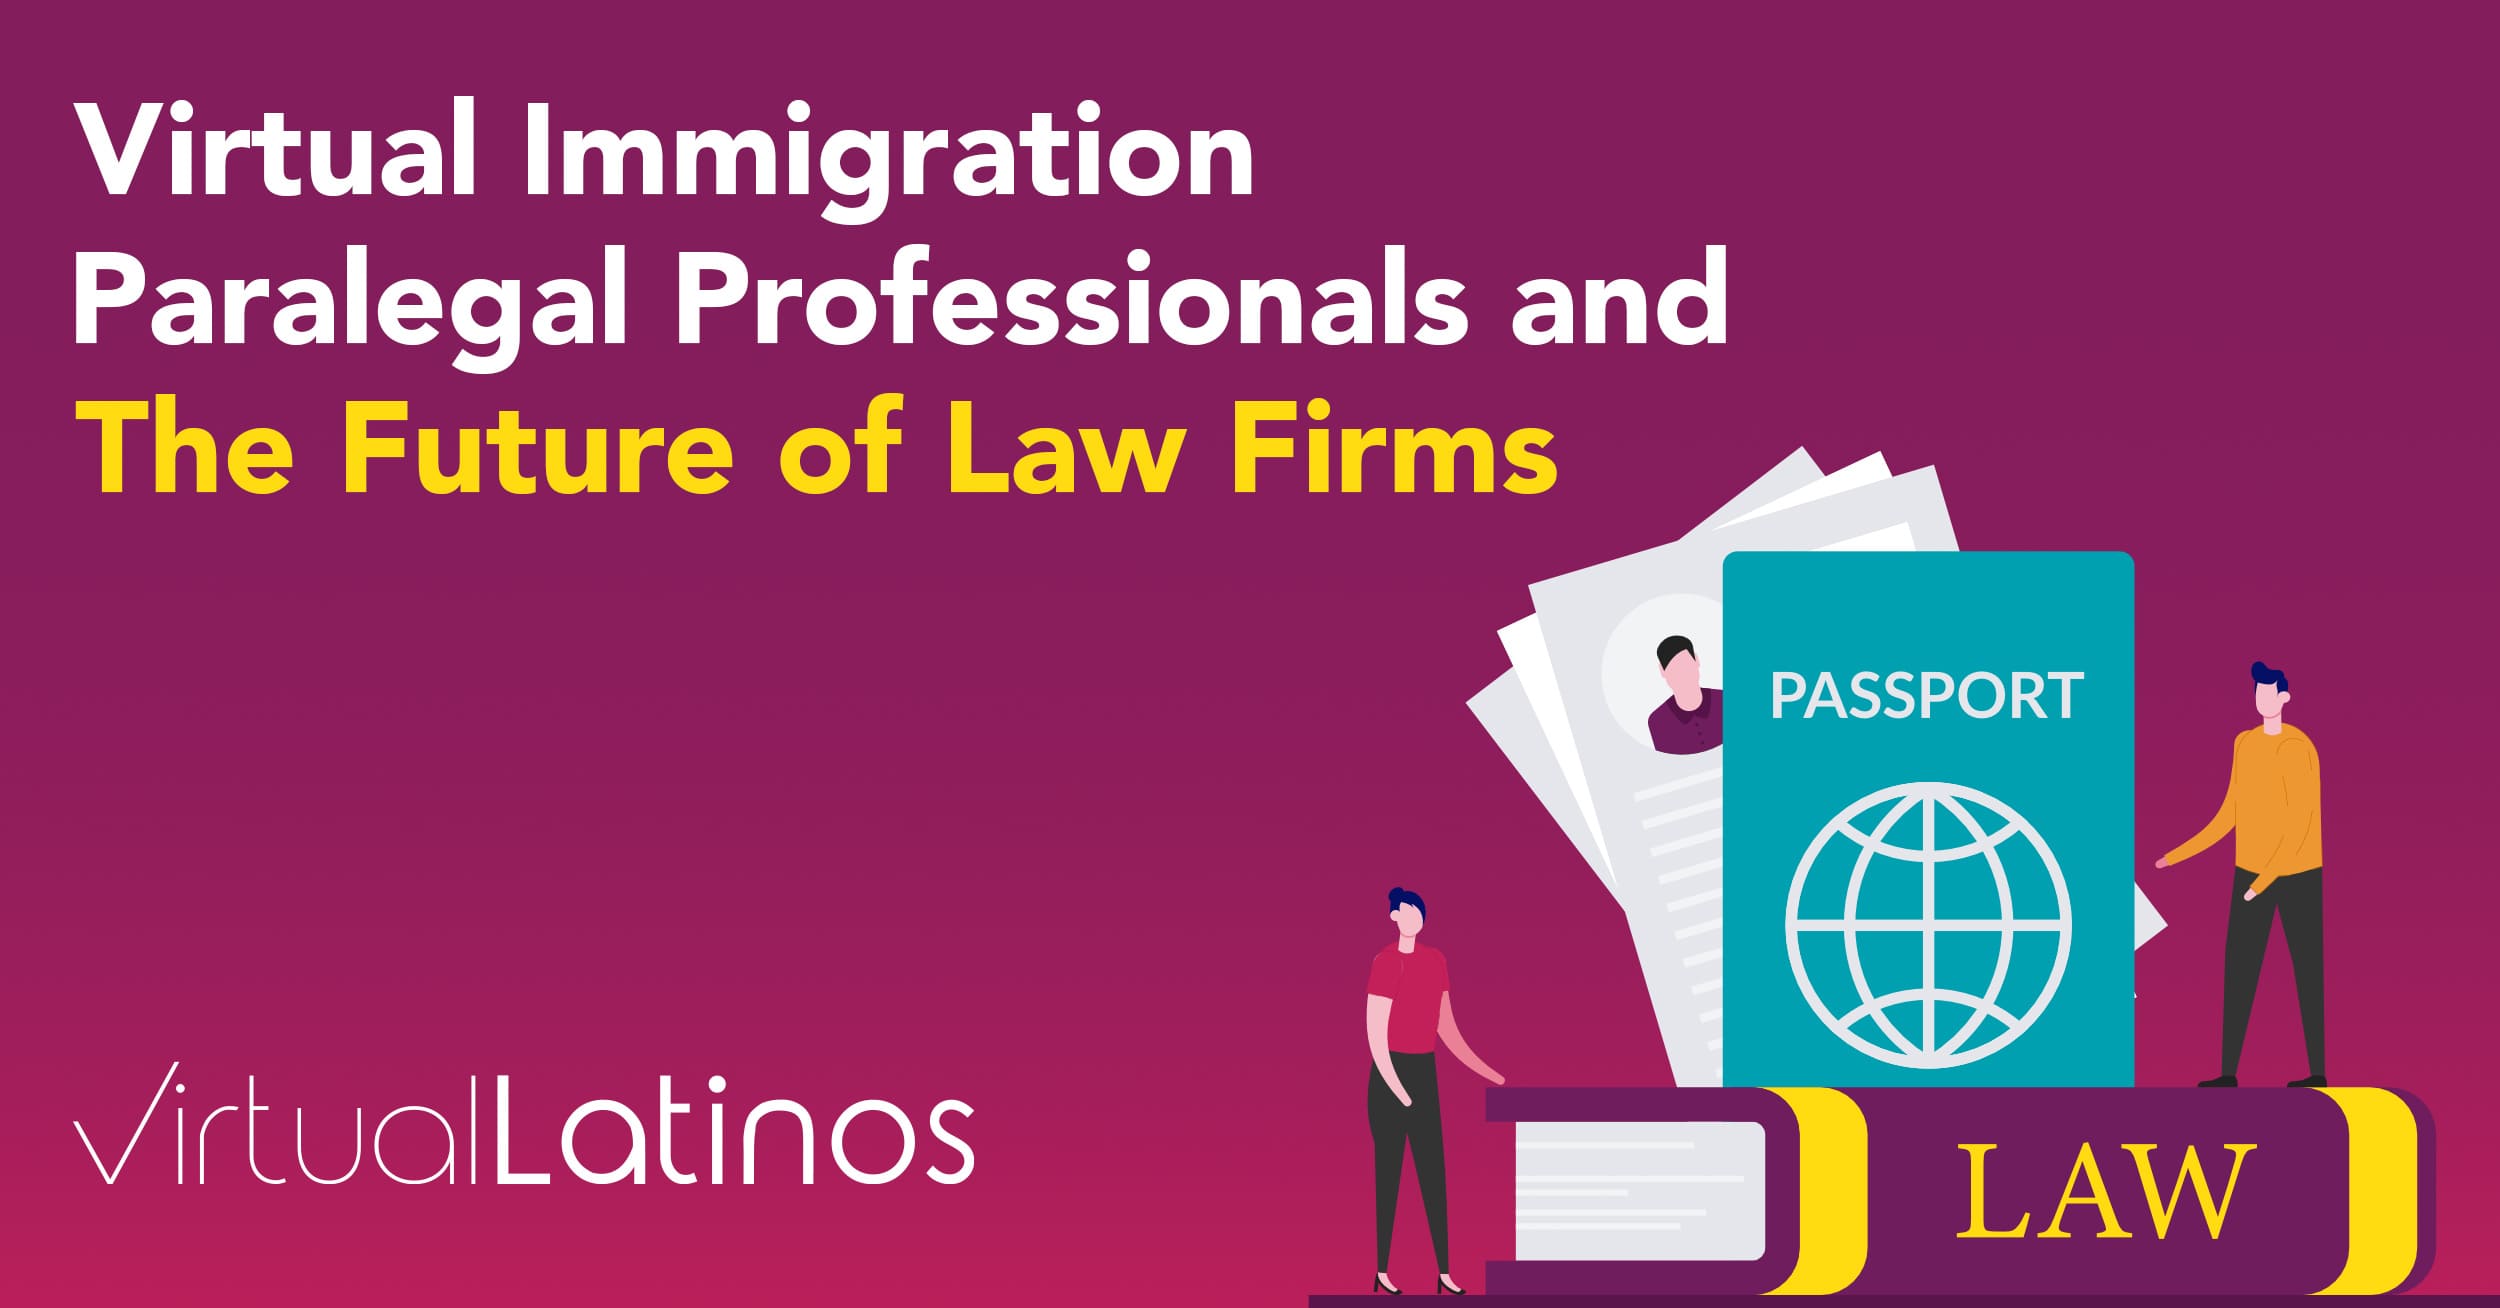 Virtual Immigration Paralegal Professionals and The Future of Law Firms